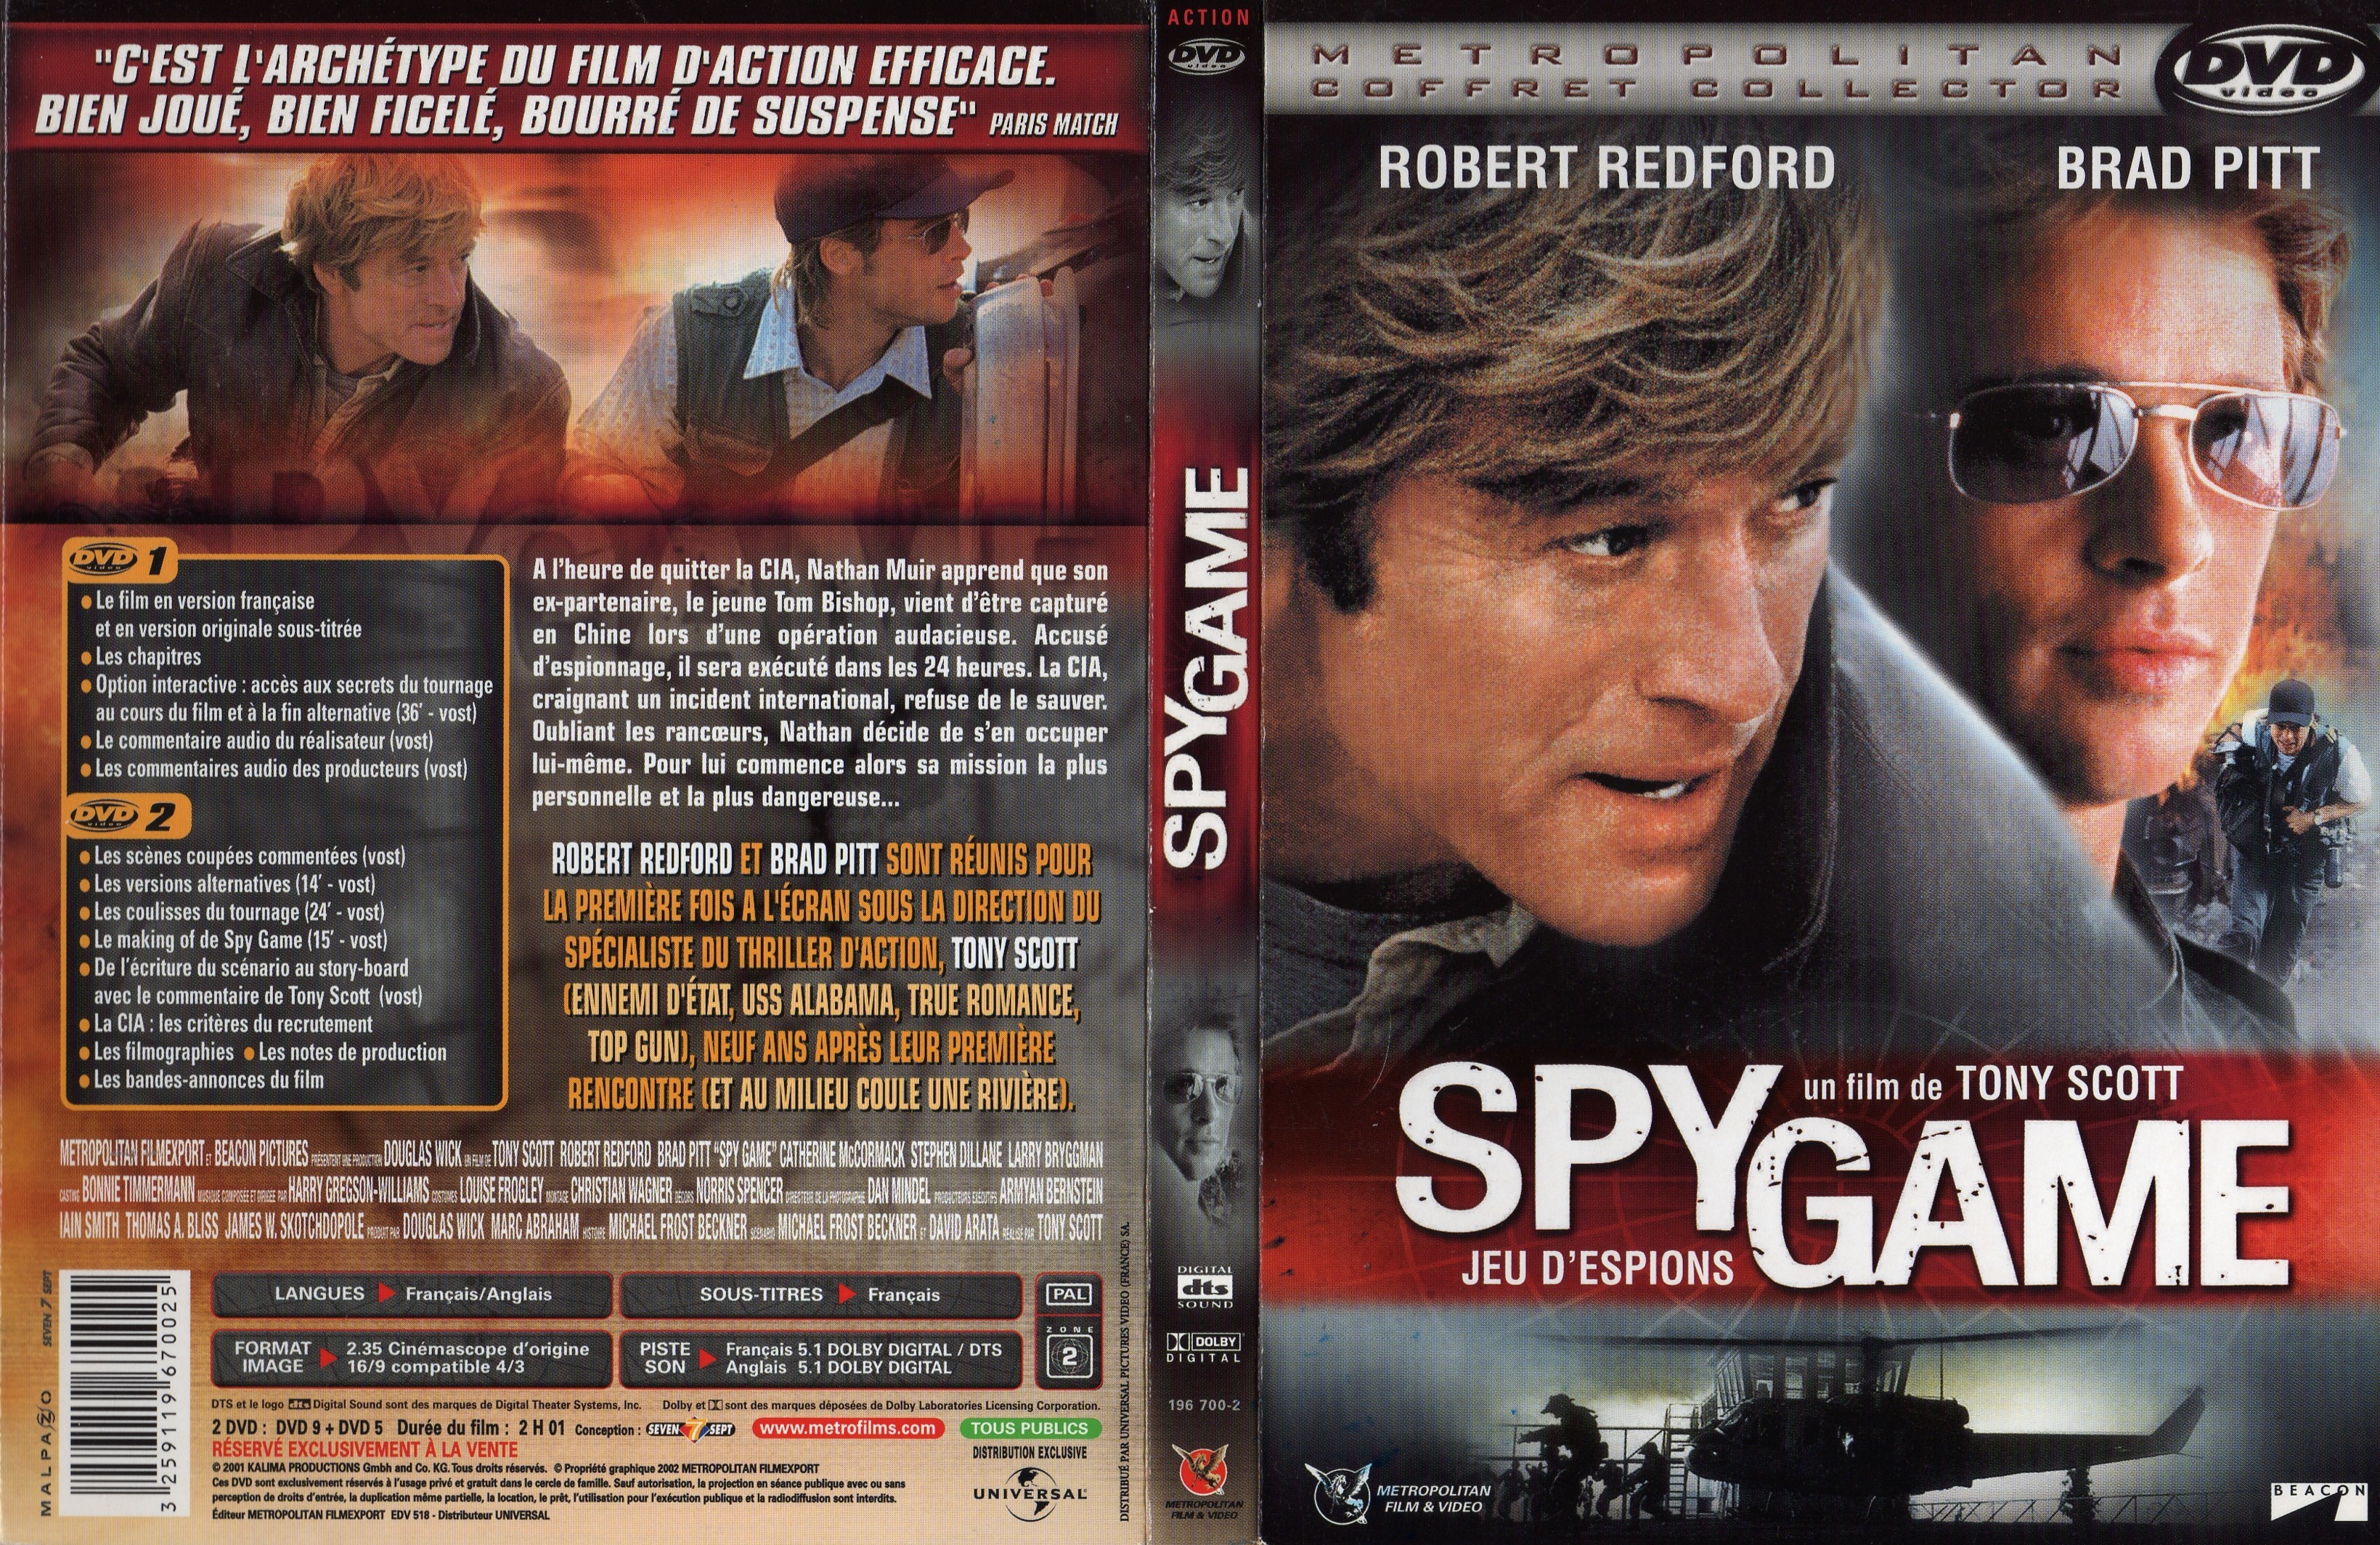 Jaquette DVD Spy game